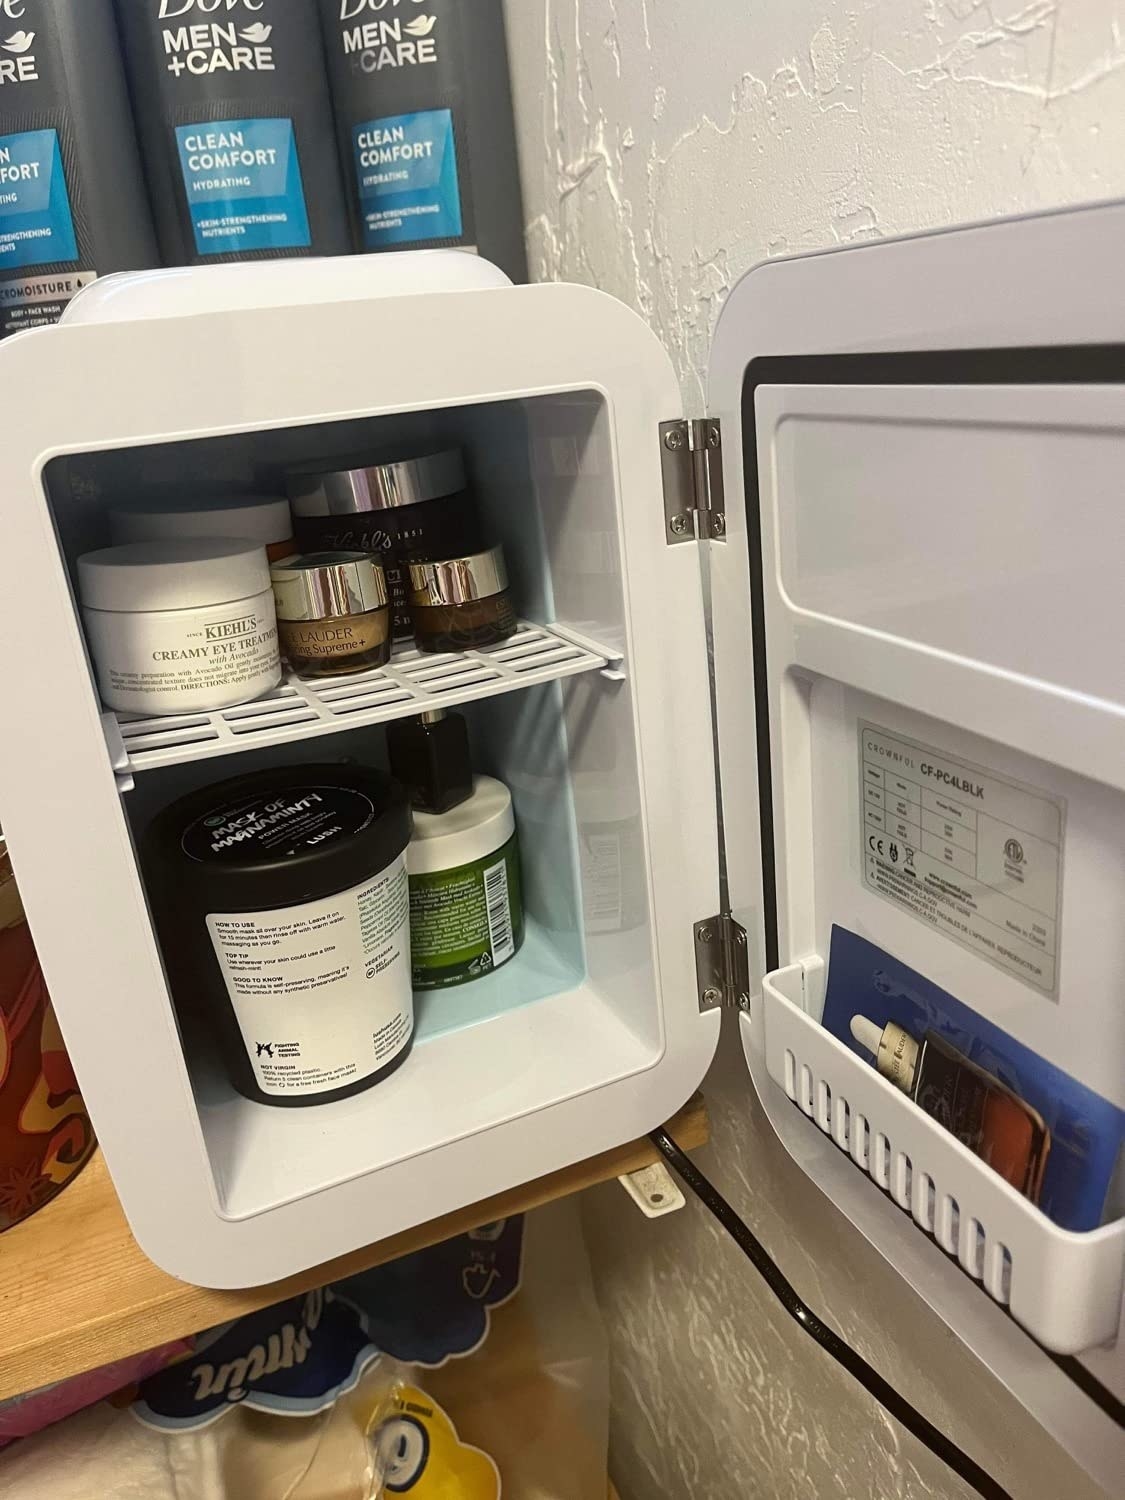 Reviewer image of skincare products in the fridge